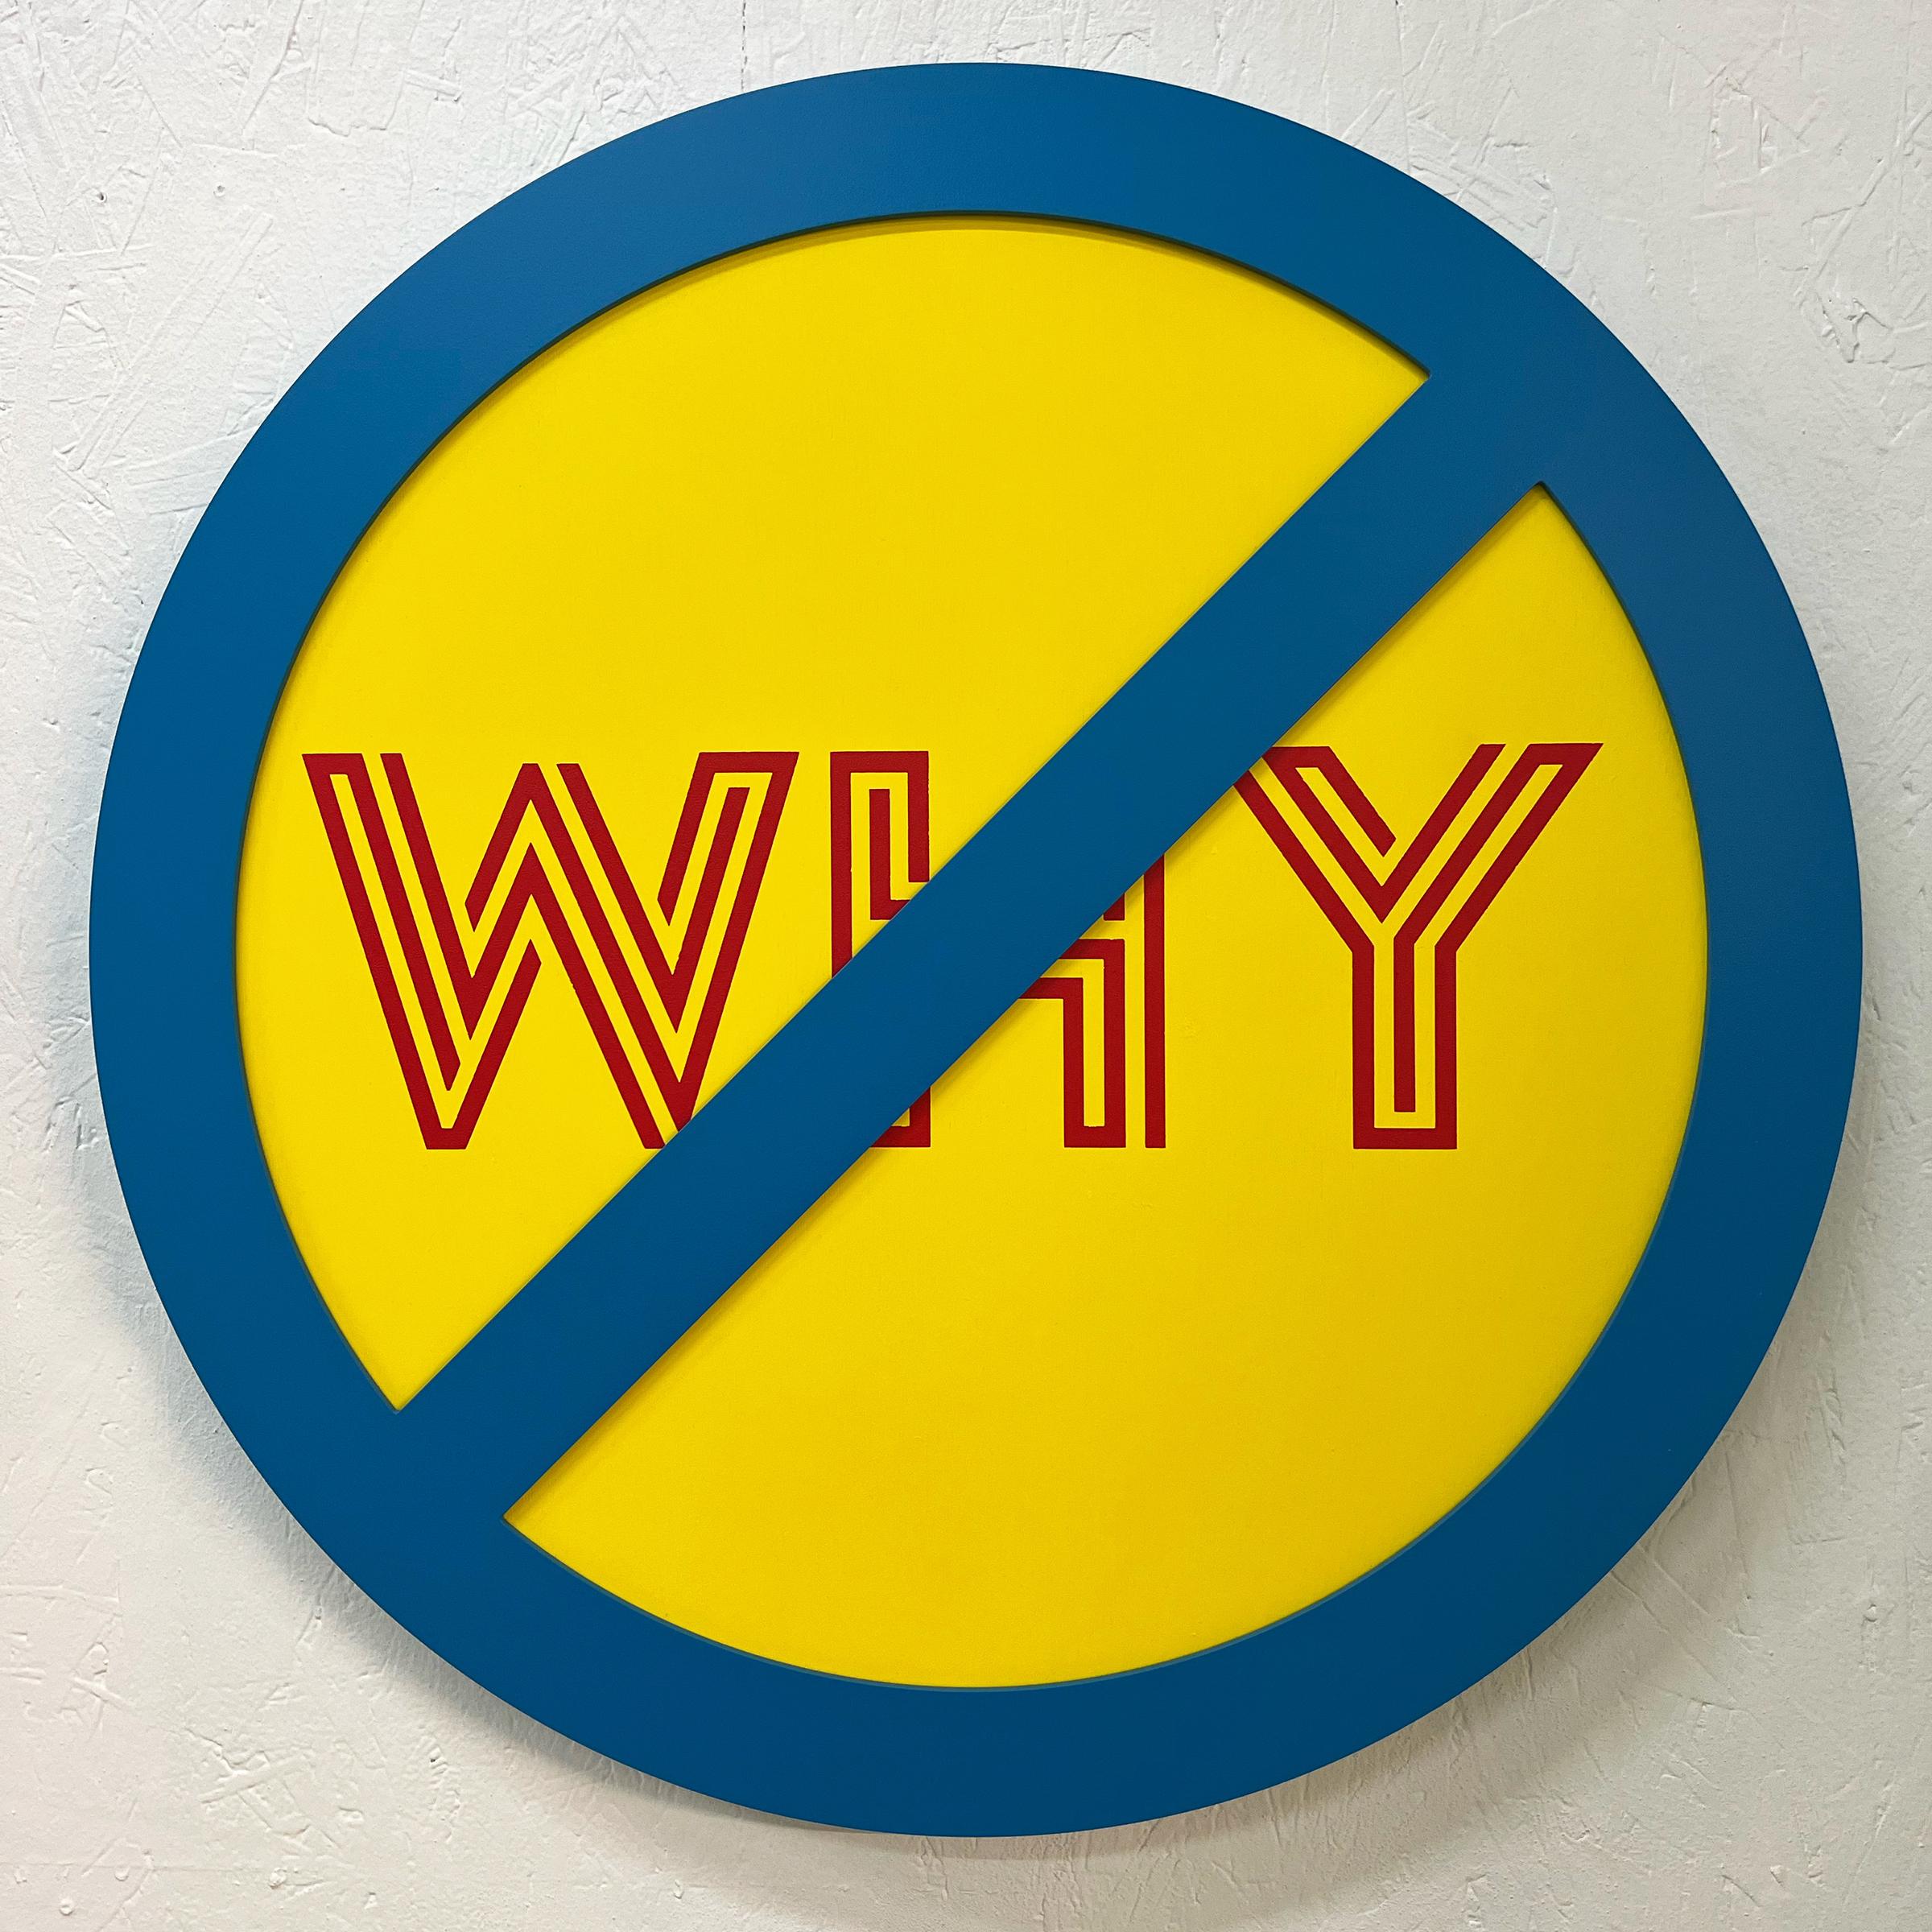 Michael Porten Portrait Painting - "No Why (Red on Yellow)" - conceptual art, wall sculpture - Lawrence Weiner